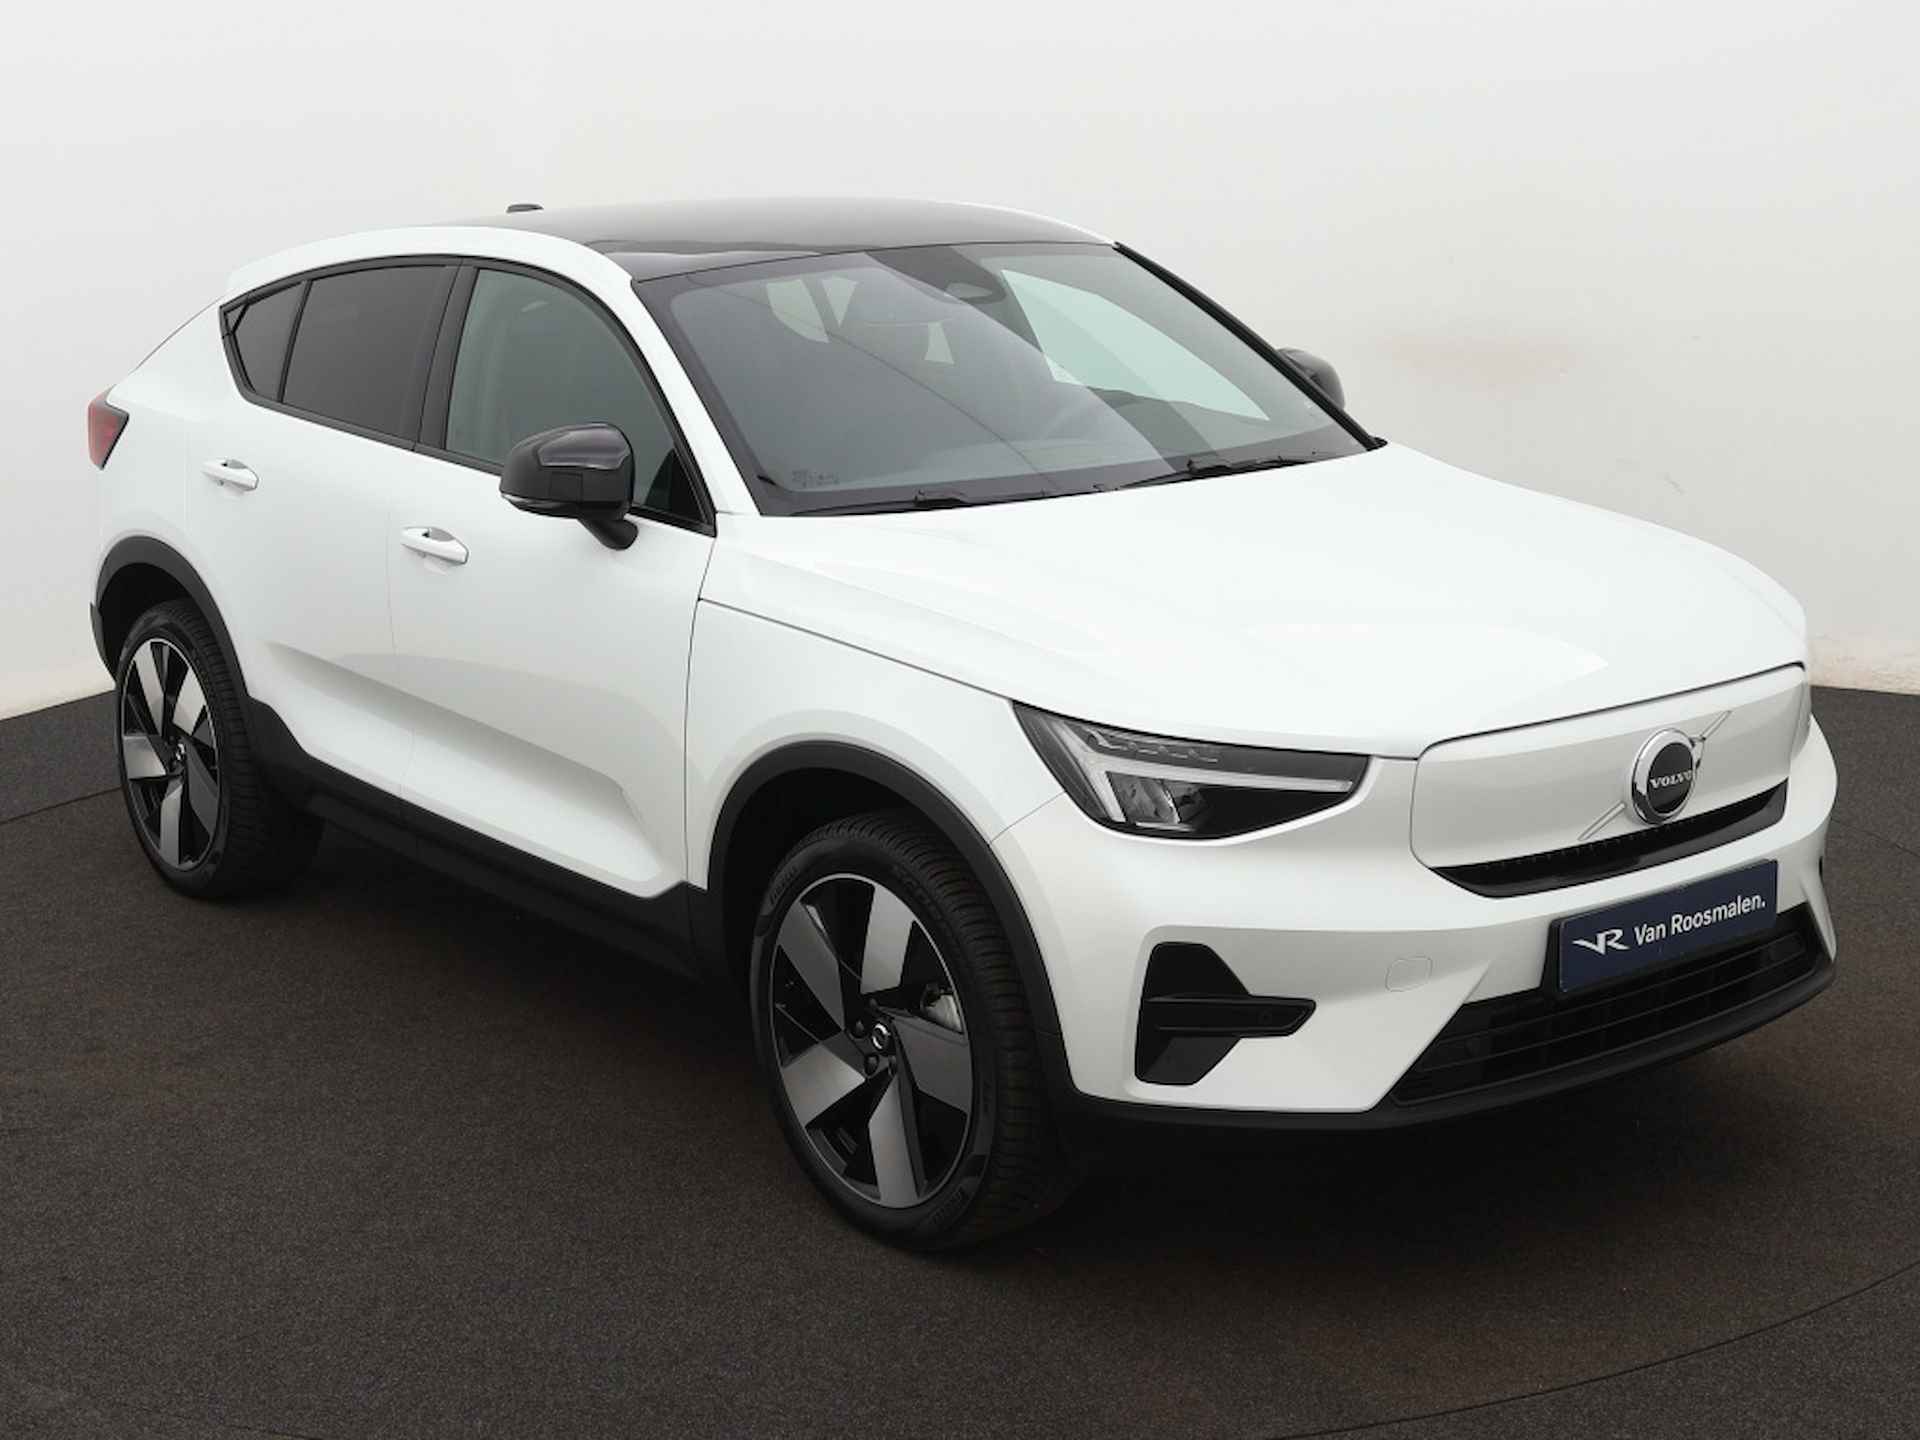 Volvo C40 Extended Plus 82 kWh - 8/47